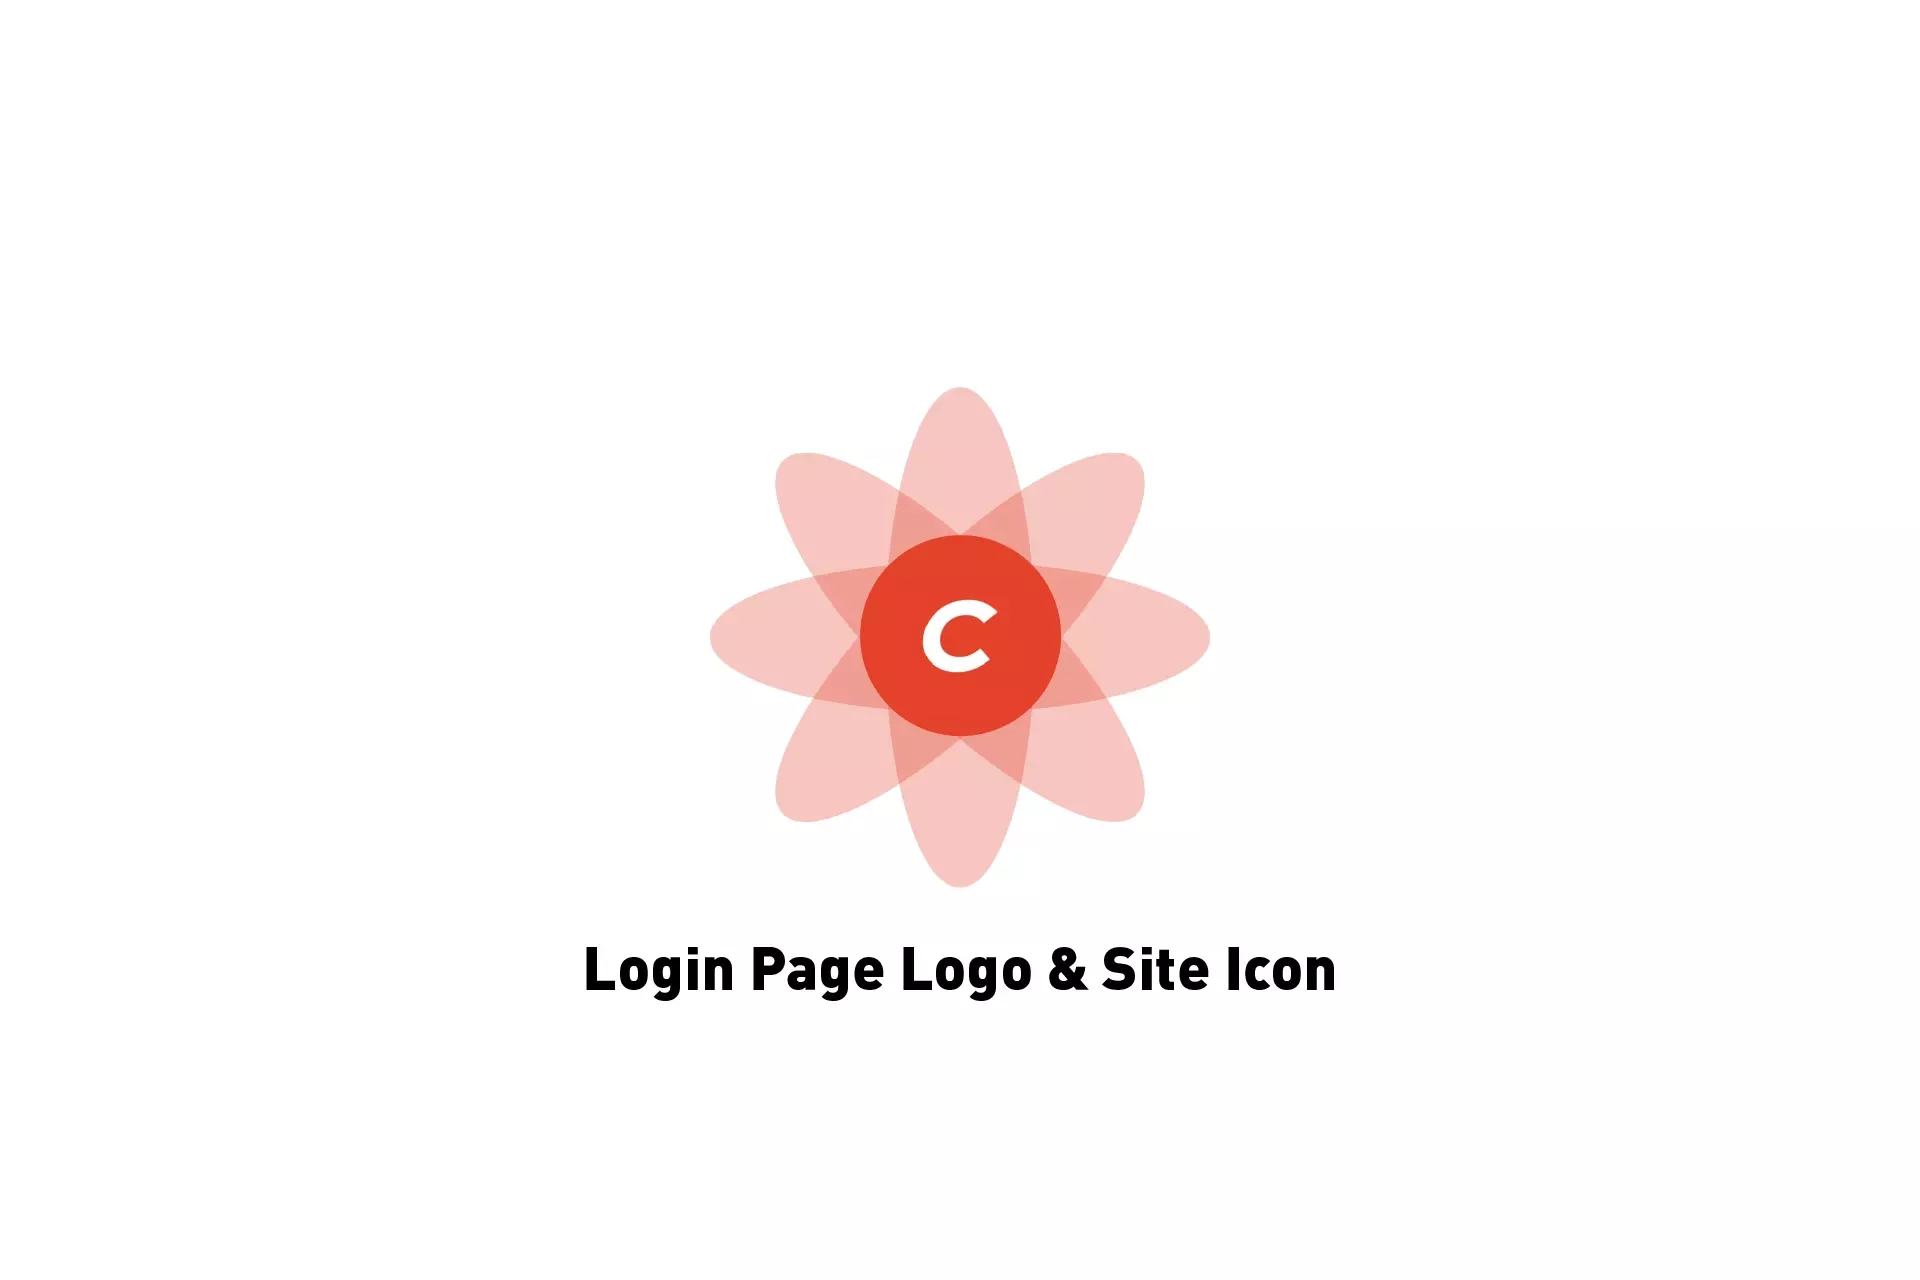 A flower that represents Craft CMS with the text "Login Page Logo & Site Icon" beneath it.